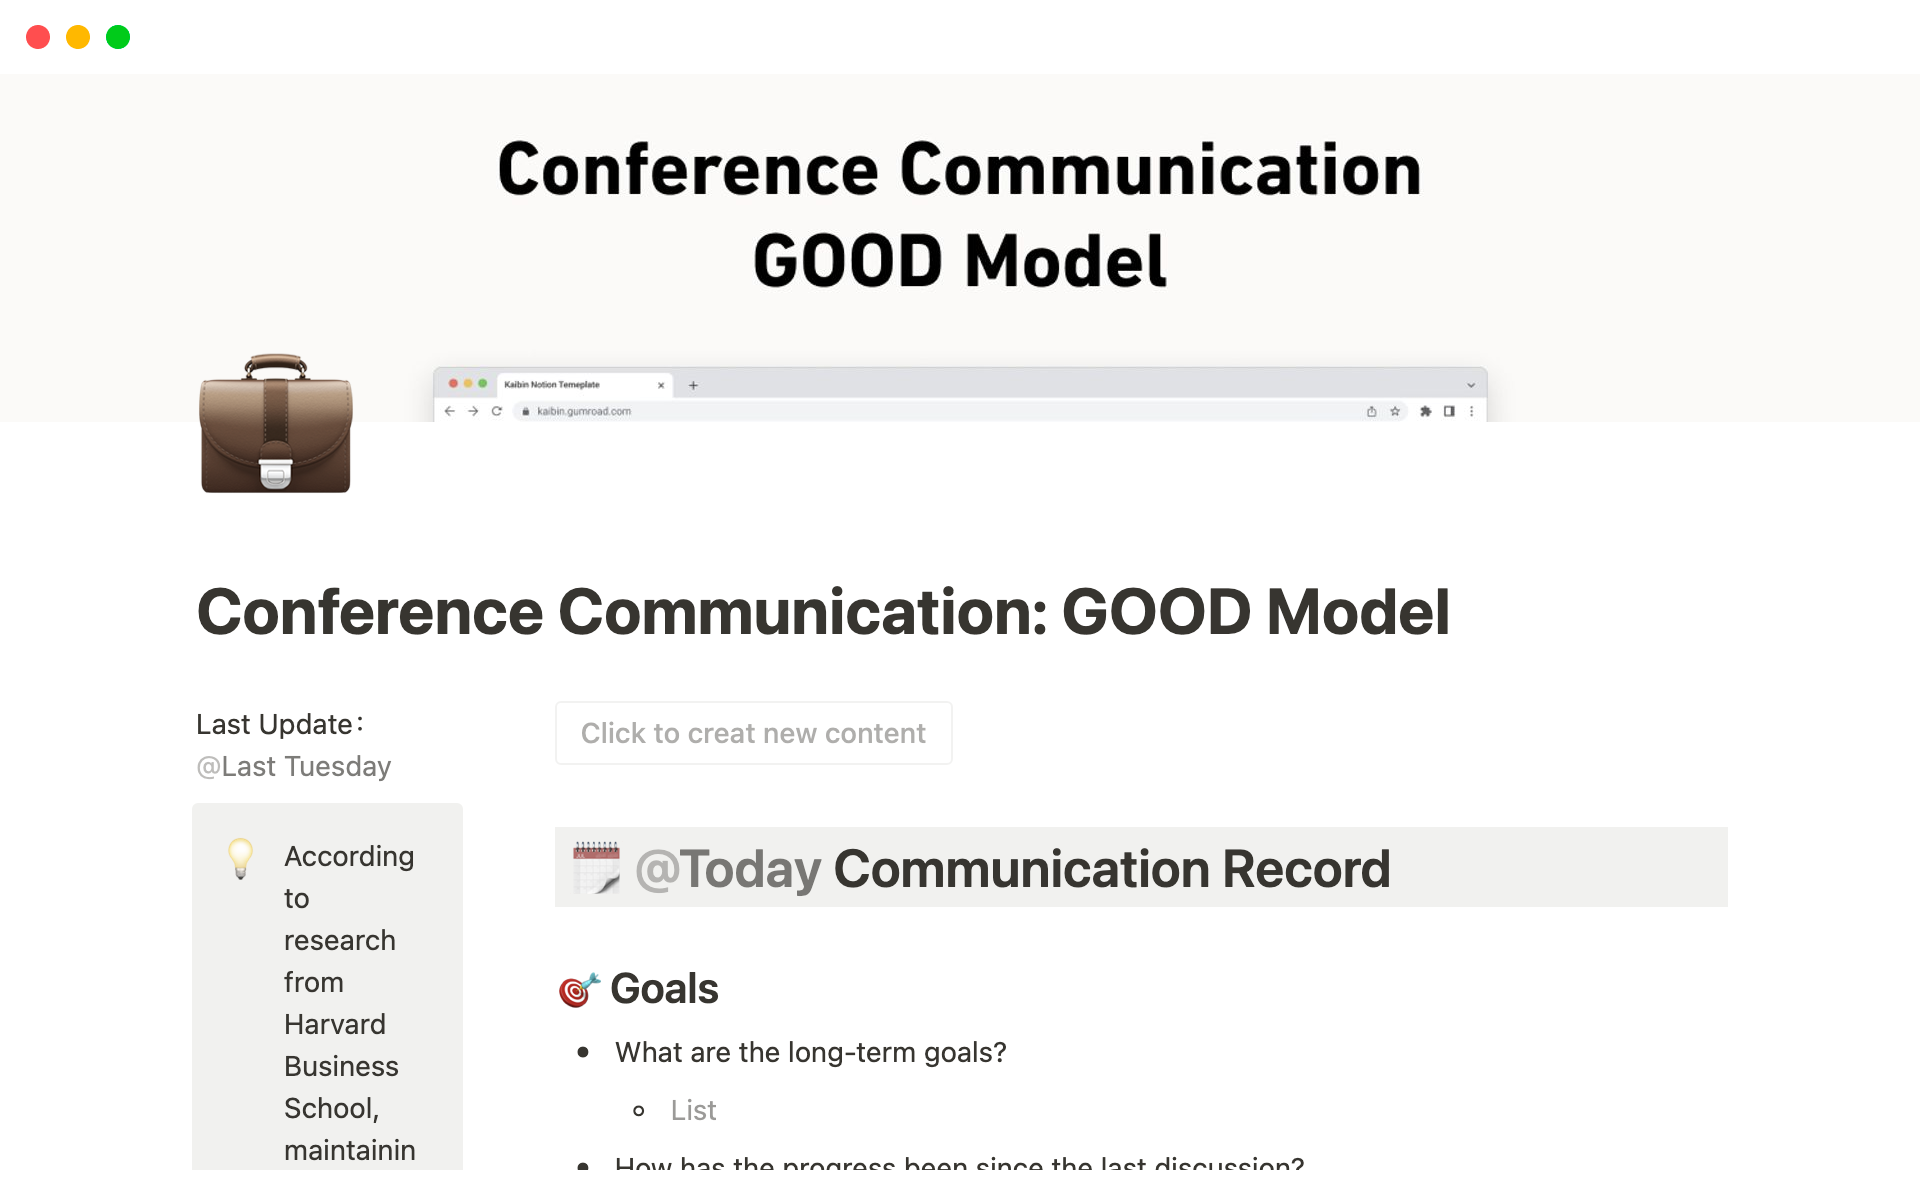 Efficient Meeting Communication through the GOOD Model.